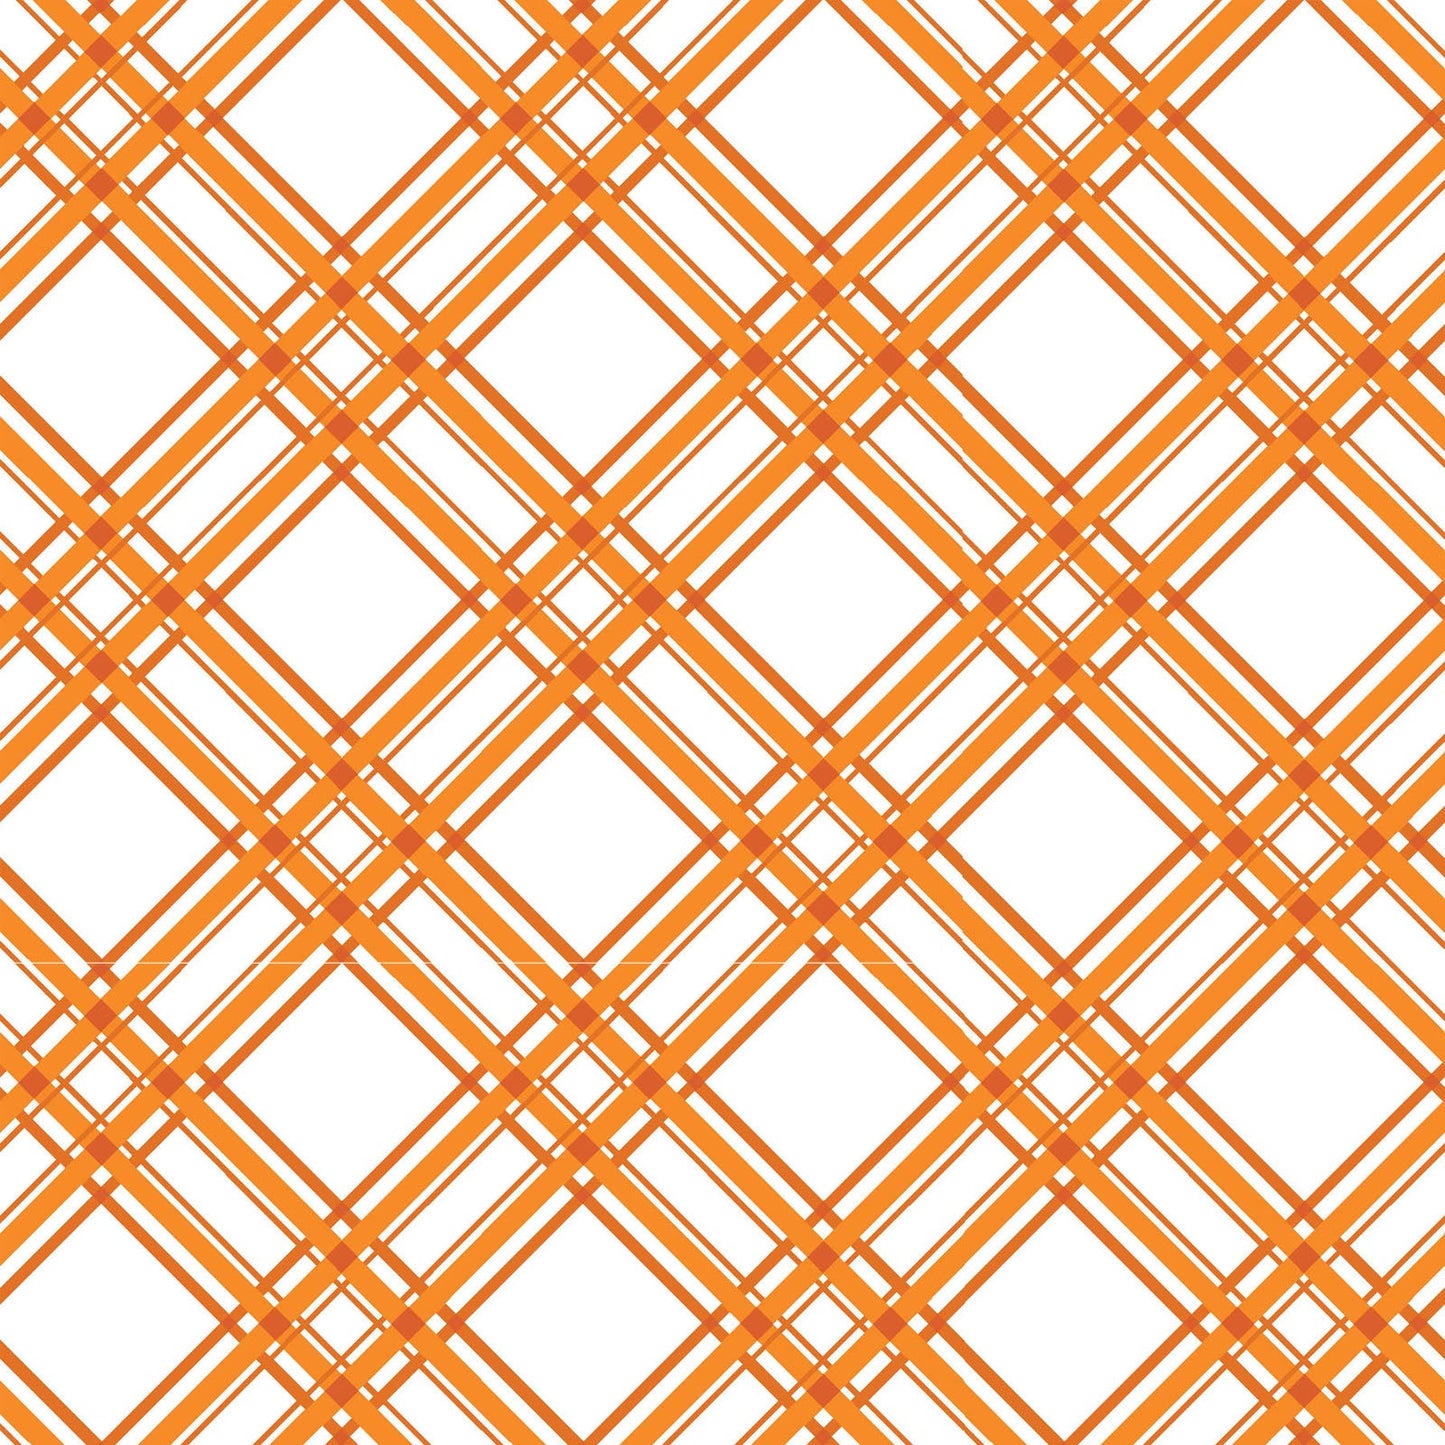 Diagonal Plaid in orange and white is part of the Kimberbell Basics line designed by Kim Christopherson for Maywood Studio. This fabric features orange stripes on the diagonal over a white background to add variety to your project. As part of the Kimberbell Basics line, it compliments other fabrics in the line.